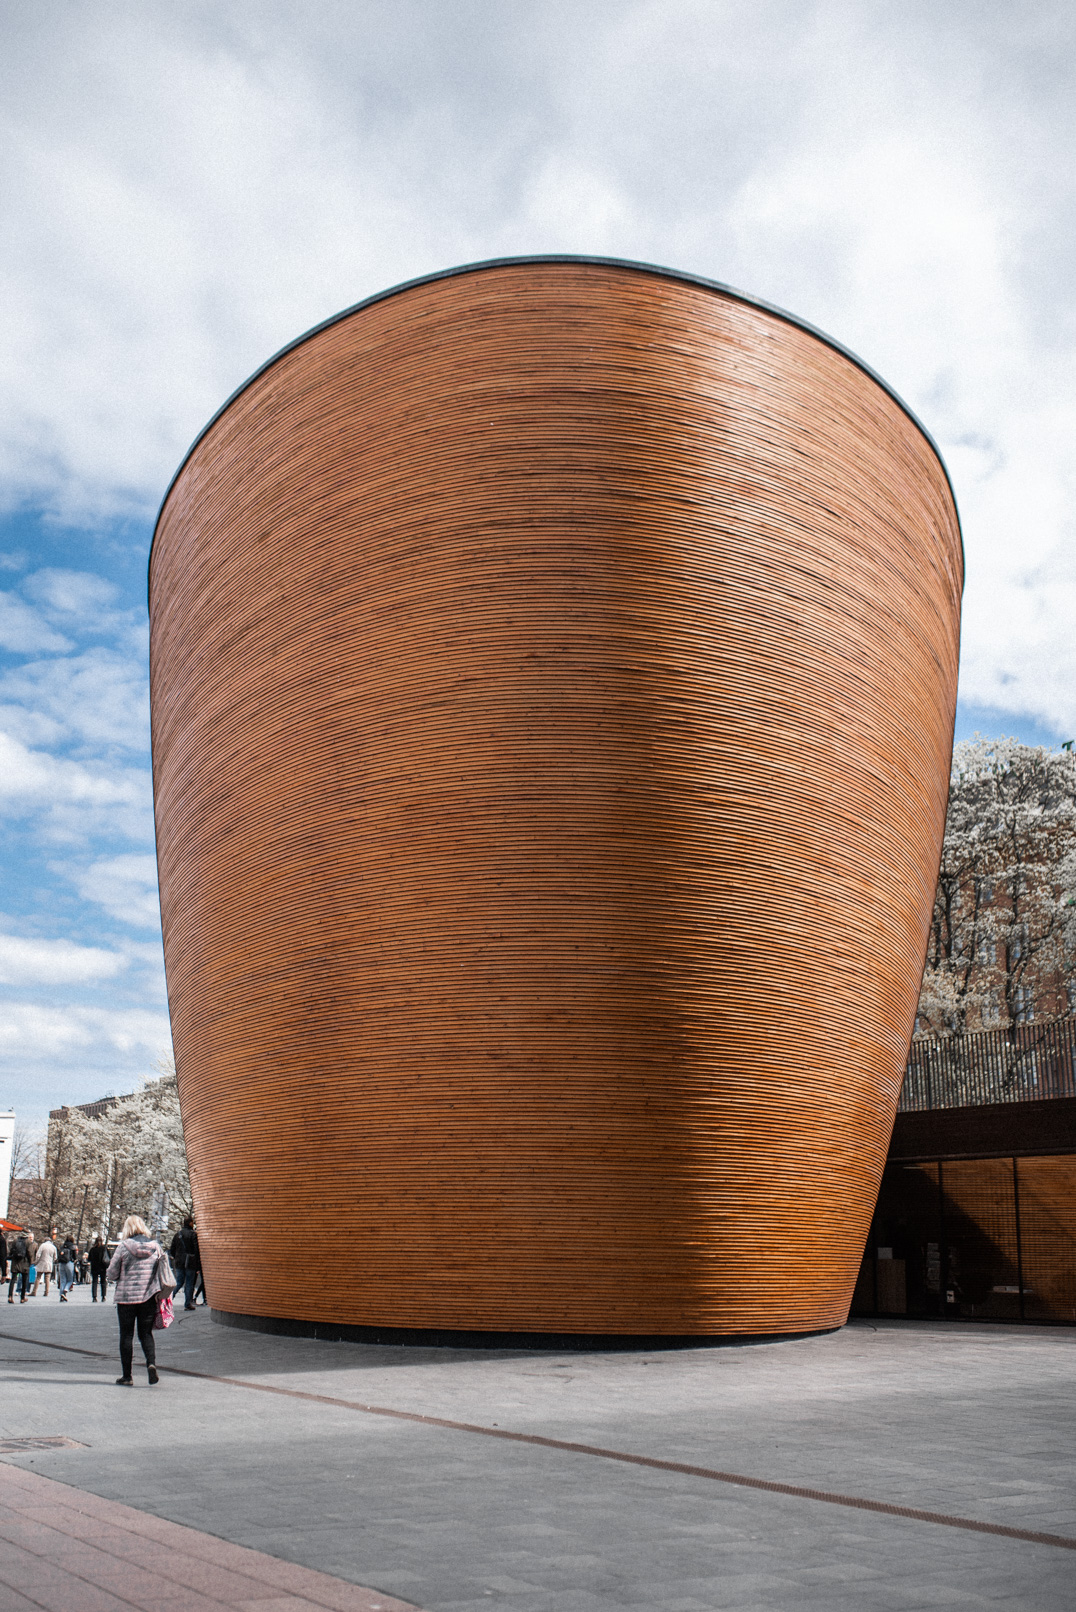 One Day in Helsinki - The curved orange exterior of the Kammpi Chapel